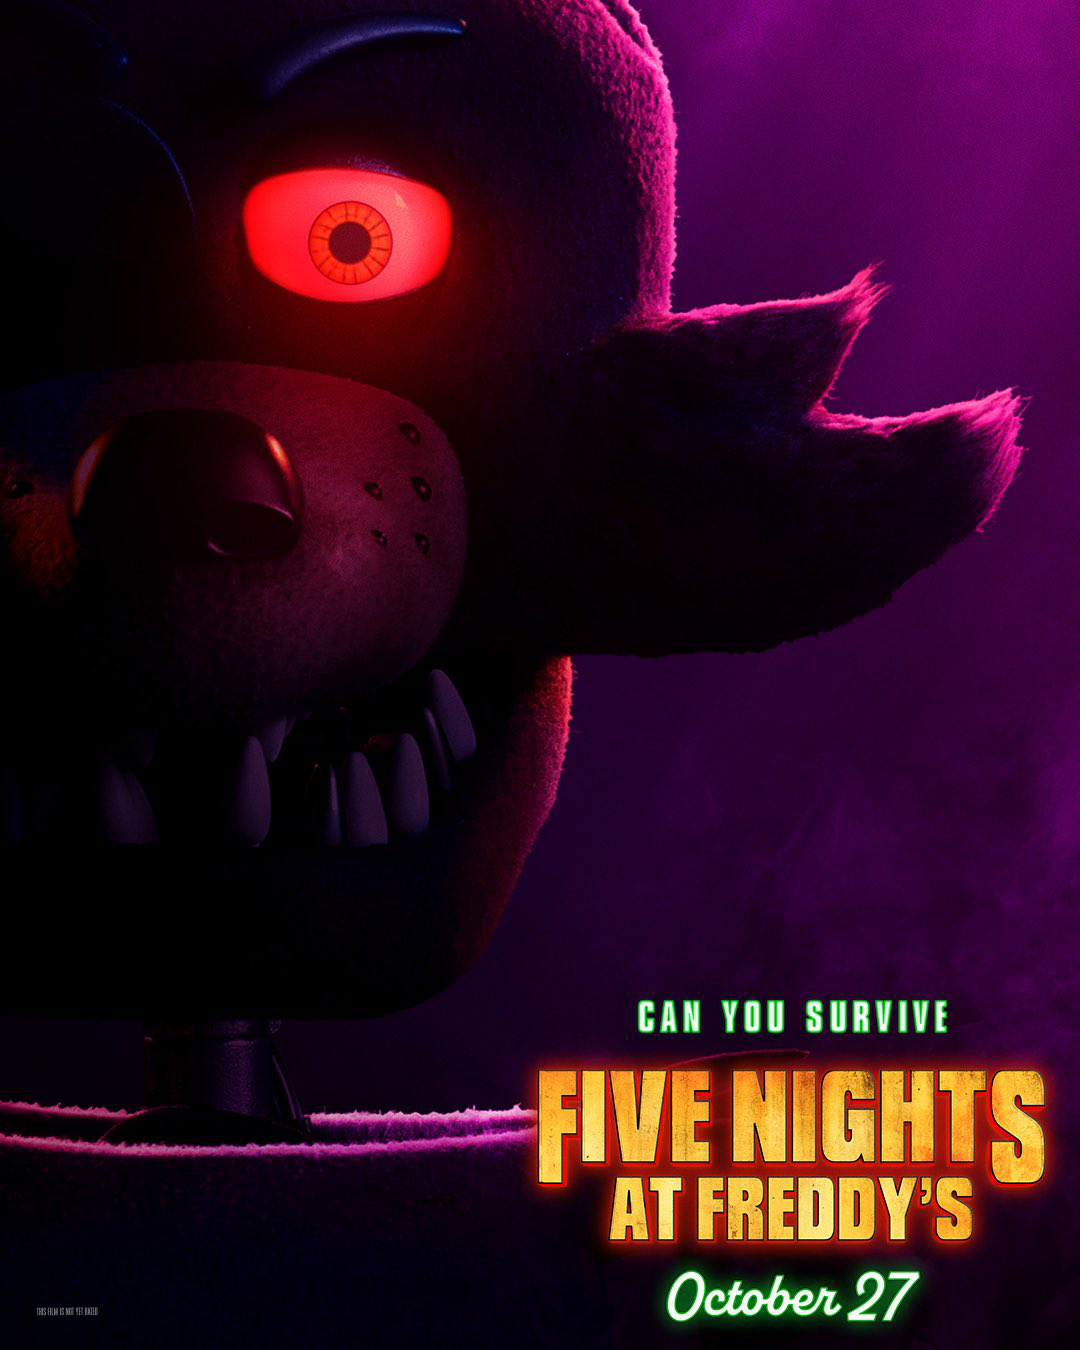 If you could design the death screens for FNAF 3, 4, 5 and